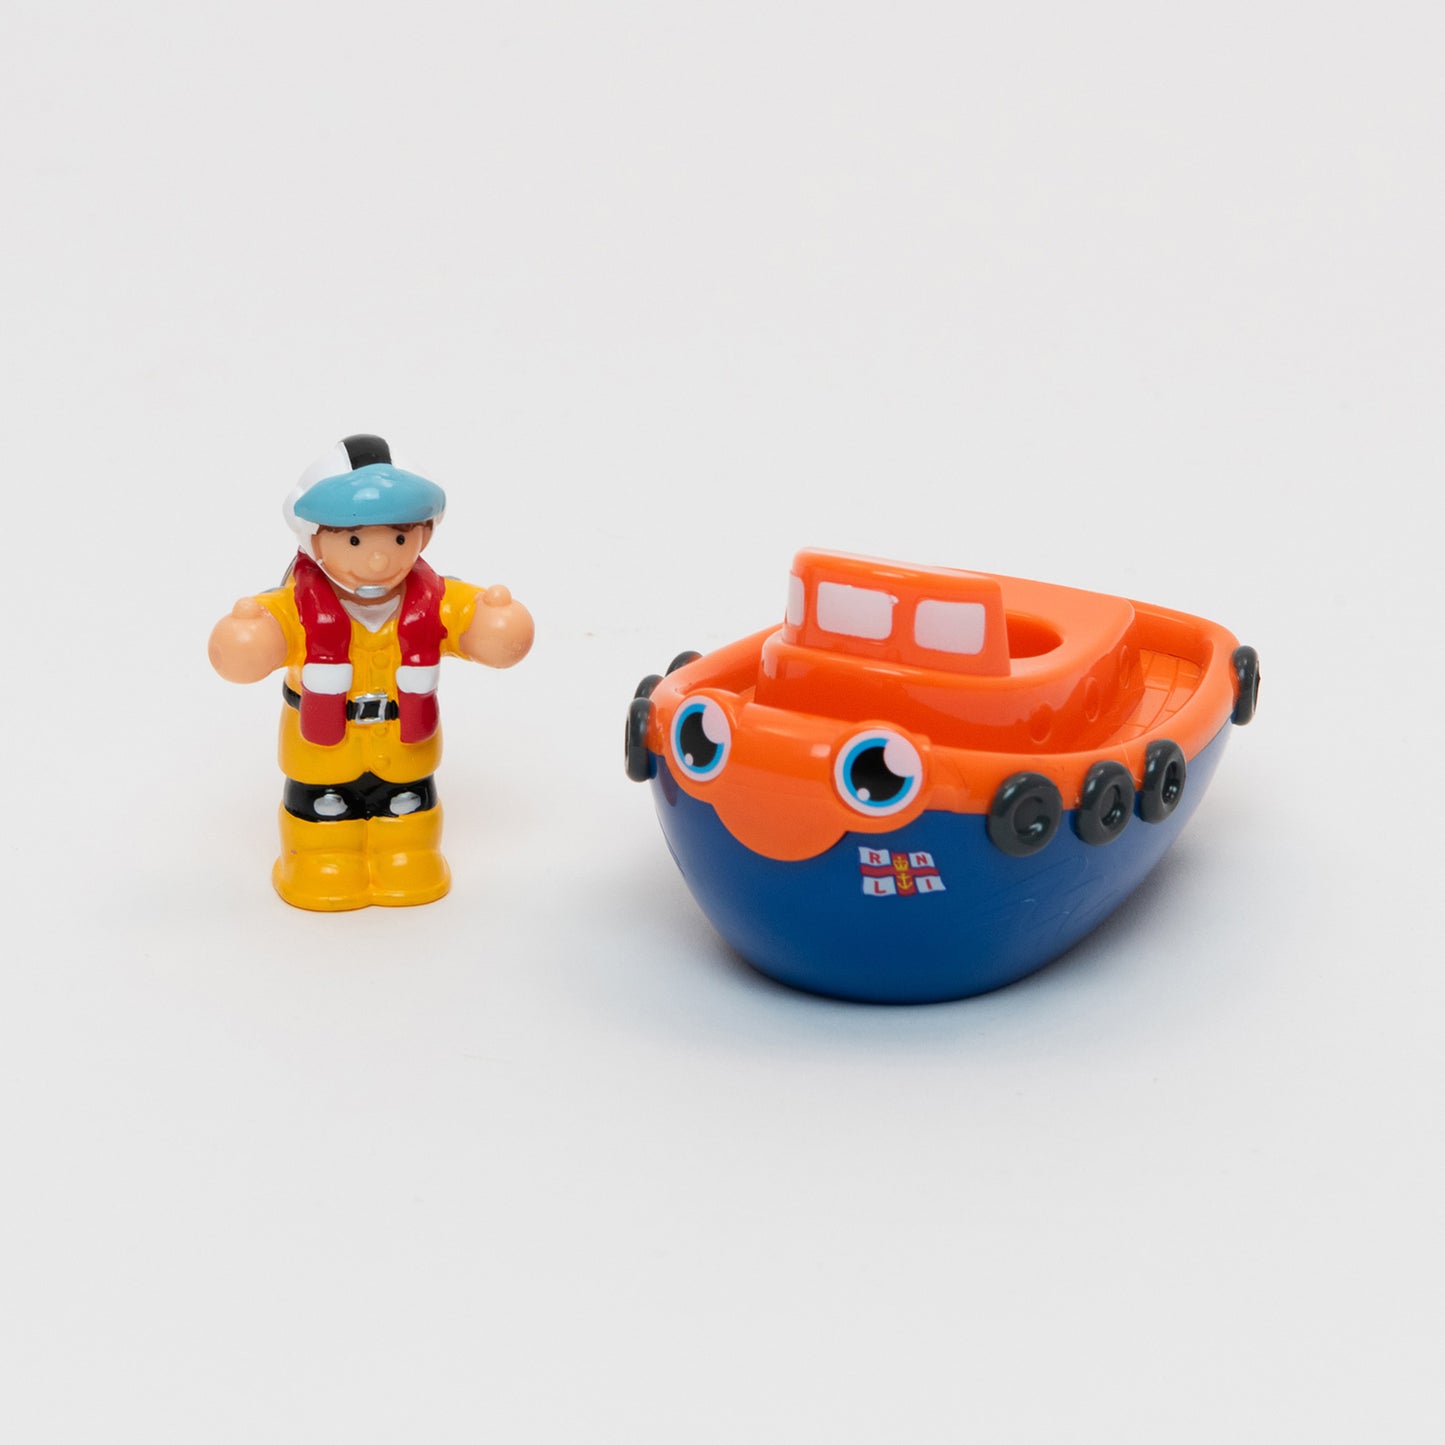 RNLI Lifeboat Lily Bath Toy.  Orange and Blue cartoon lifeboat toy with detachable RNLI team member Lily in her yellow waterproofs and helmet.